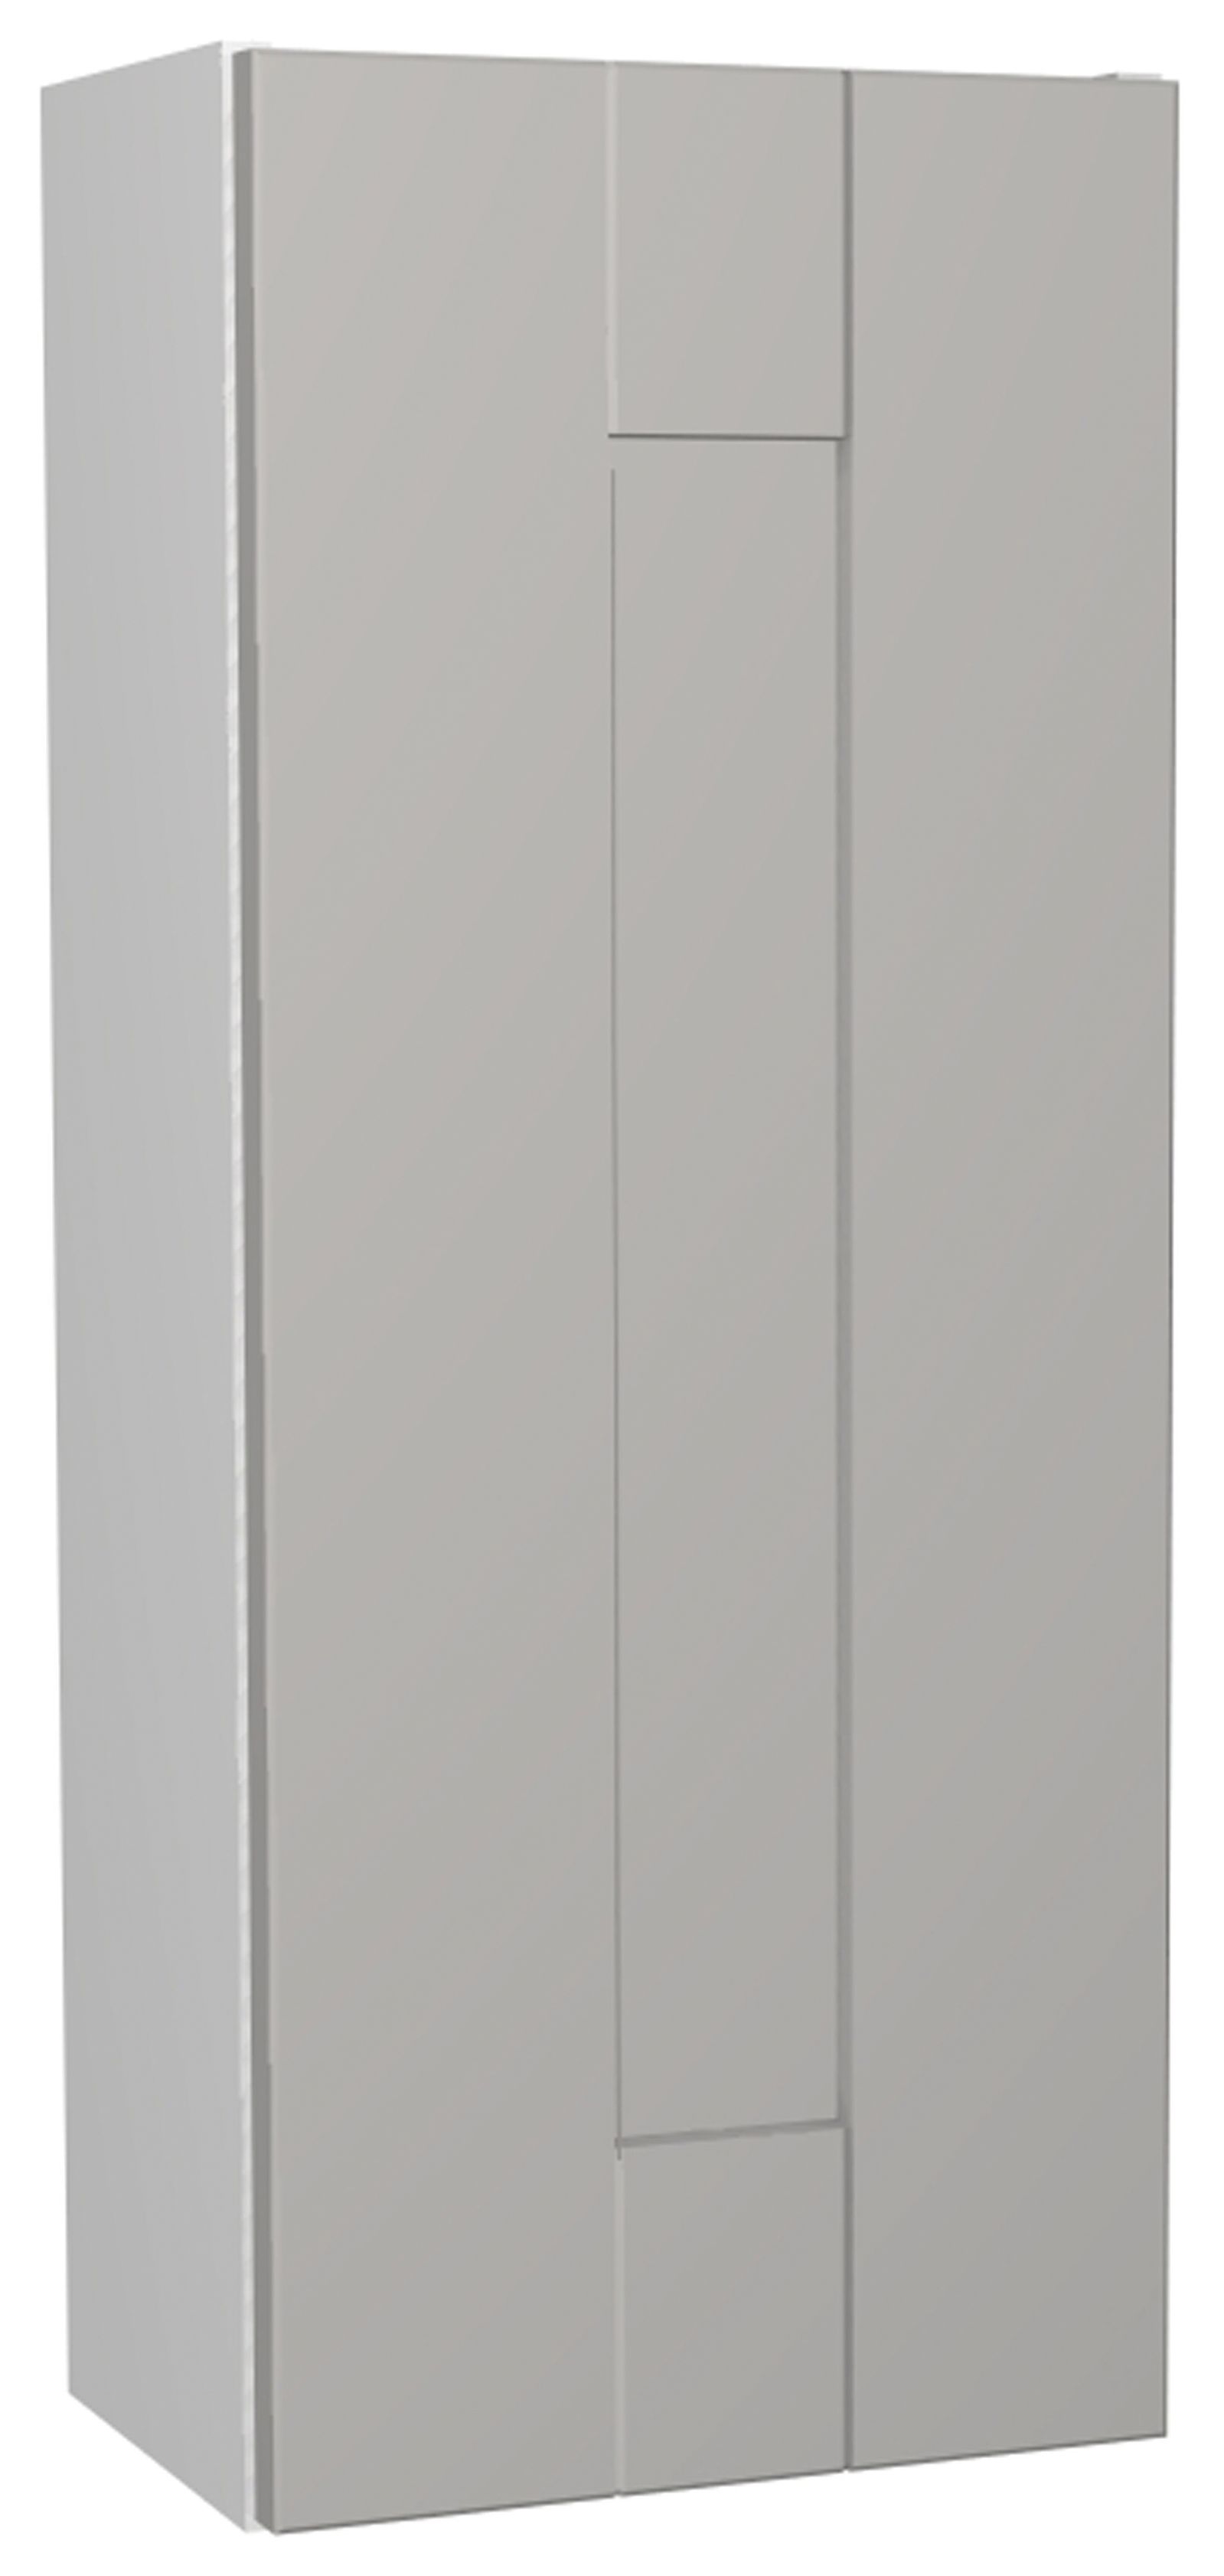 Image of Wickes Vermont Grey Base / Wall Storage Unit - 300 x 735mm